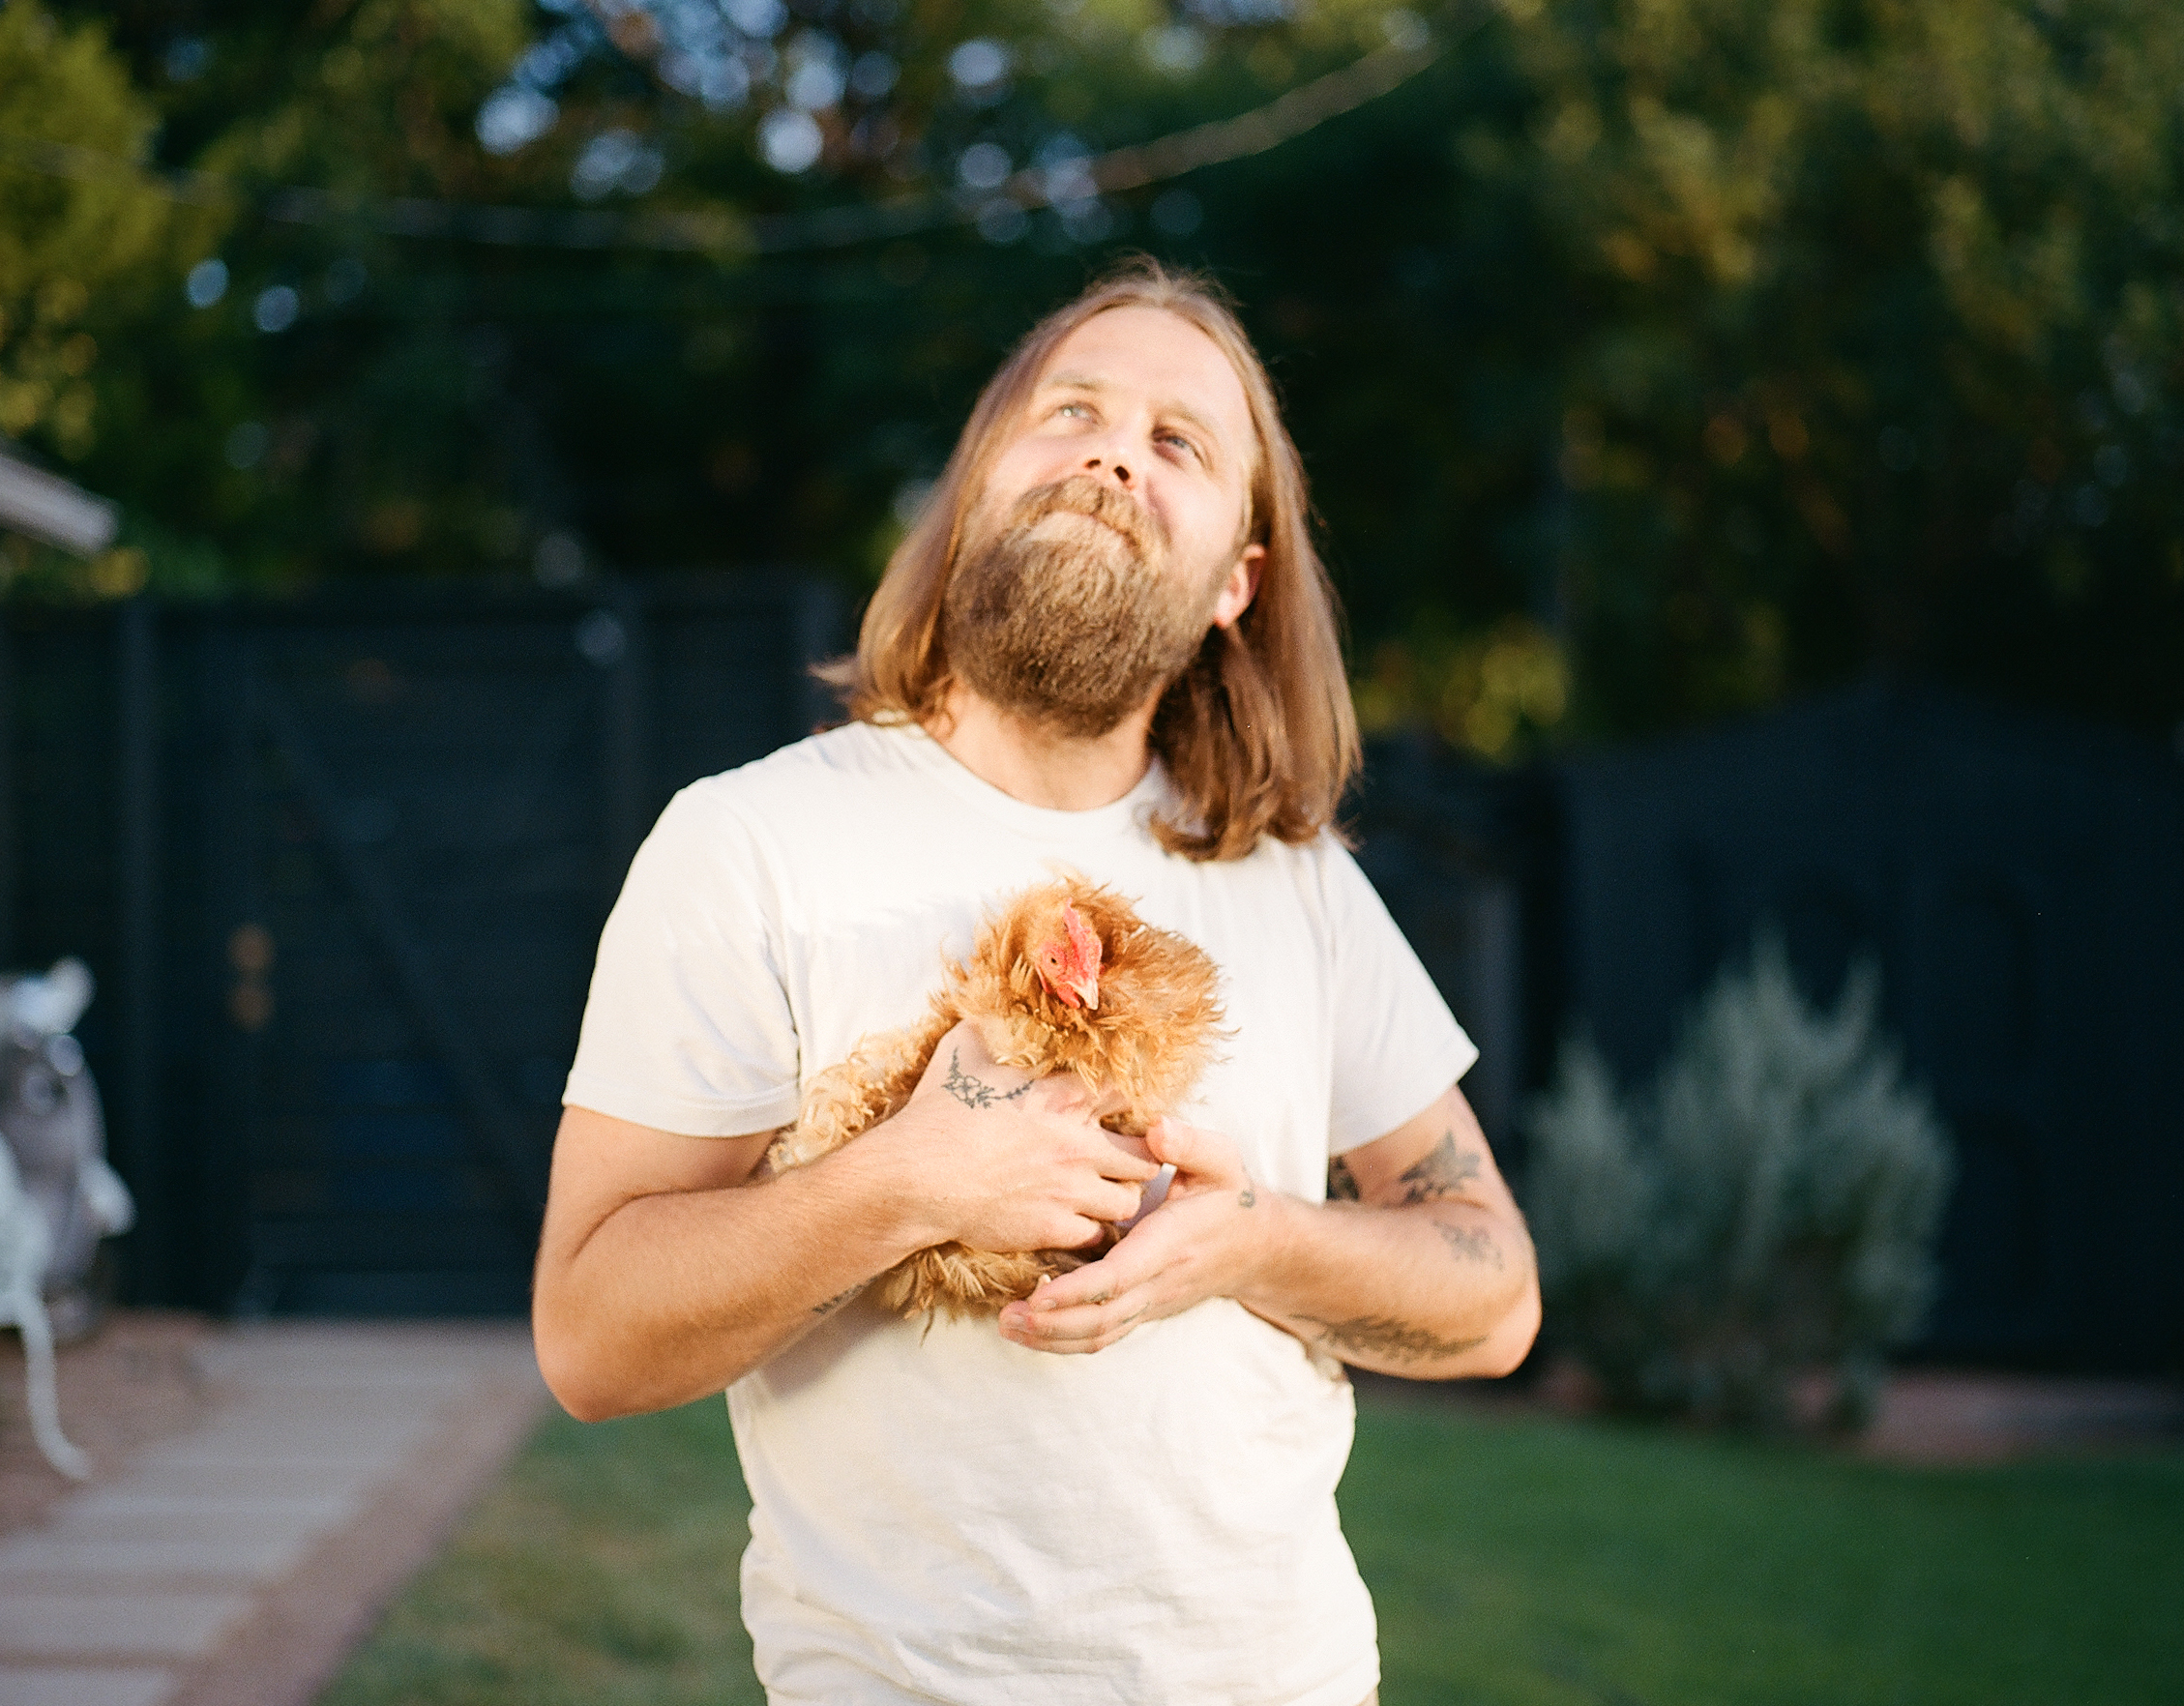 Brody Price, wearing a white T-shirt and holding a chicken, looks off to the left